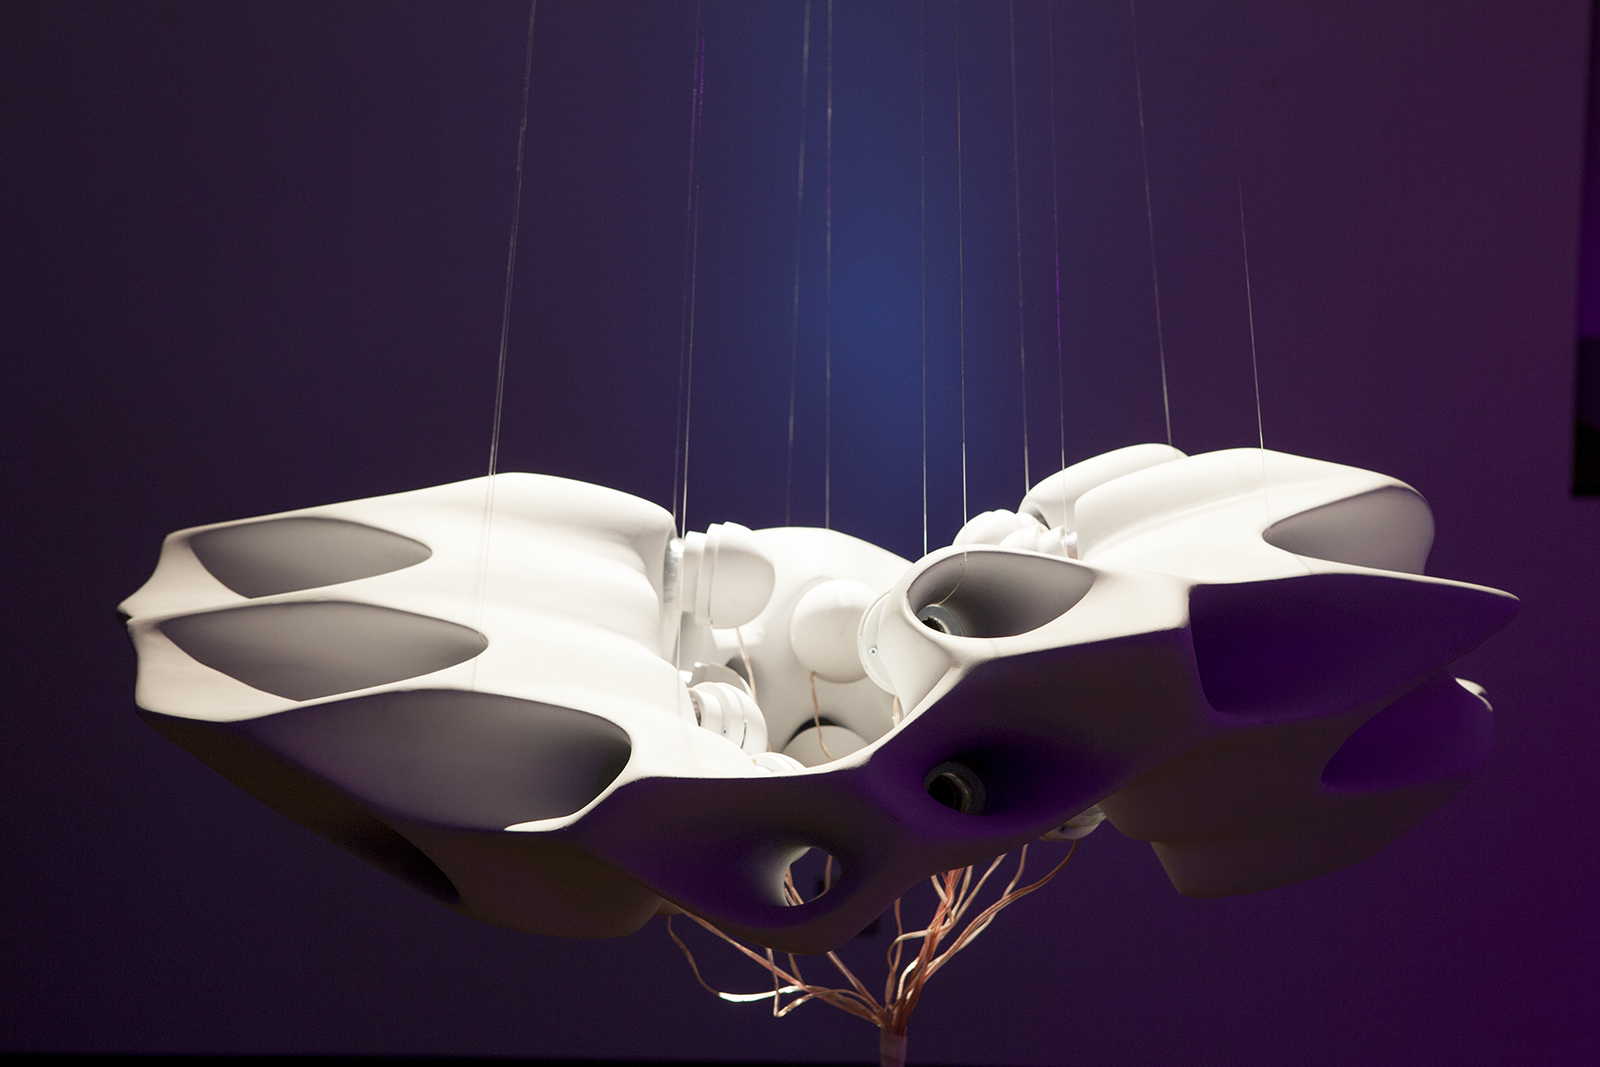 HIVE, a spatial sound installation installation that uses Lithe as its sound engine.